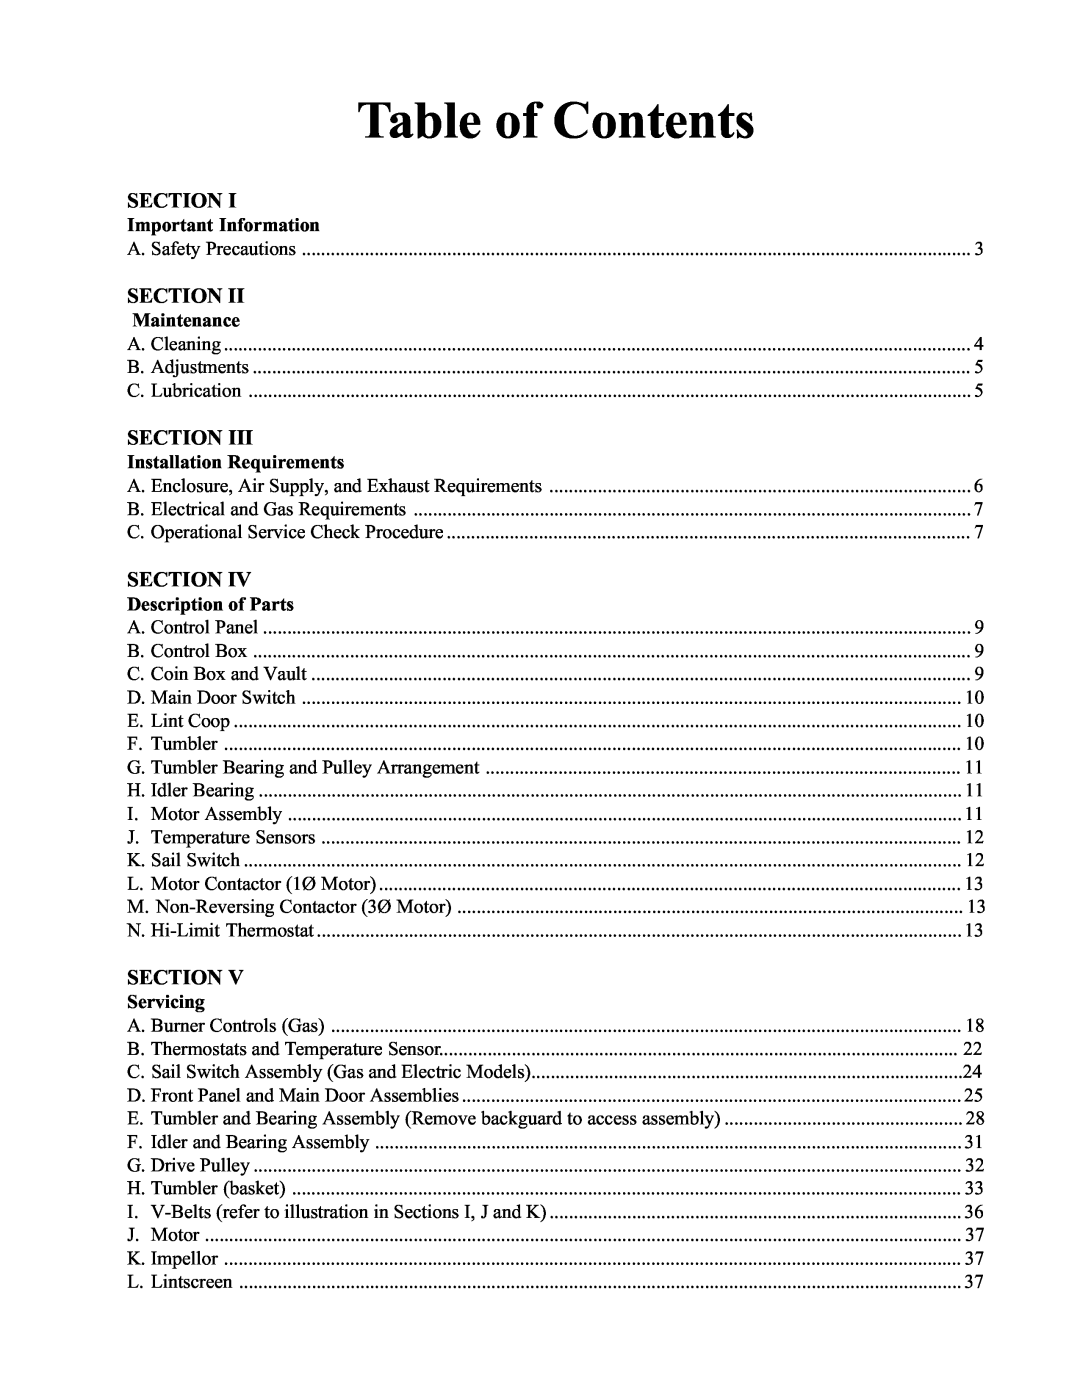 American Dryer Corp WDA-385 Table of Contents, Important Information, Maintenance, Installation Requirements, Servicing 